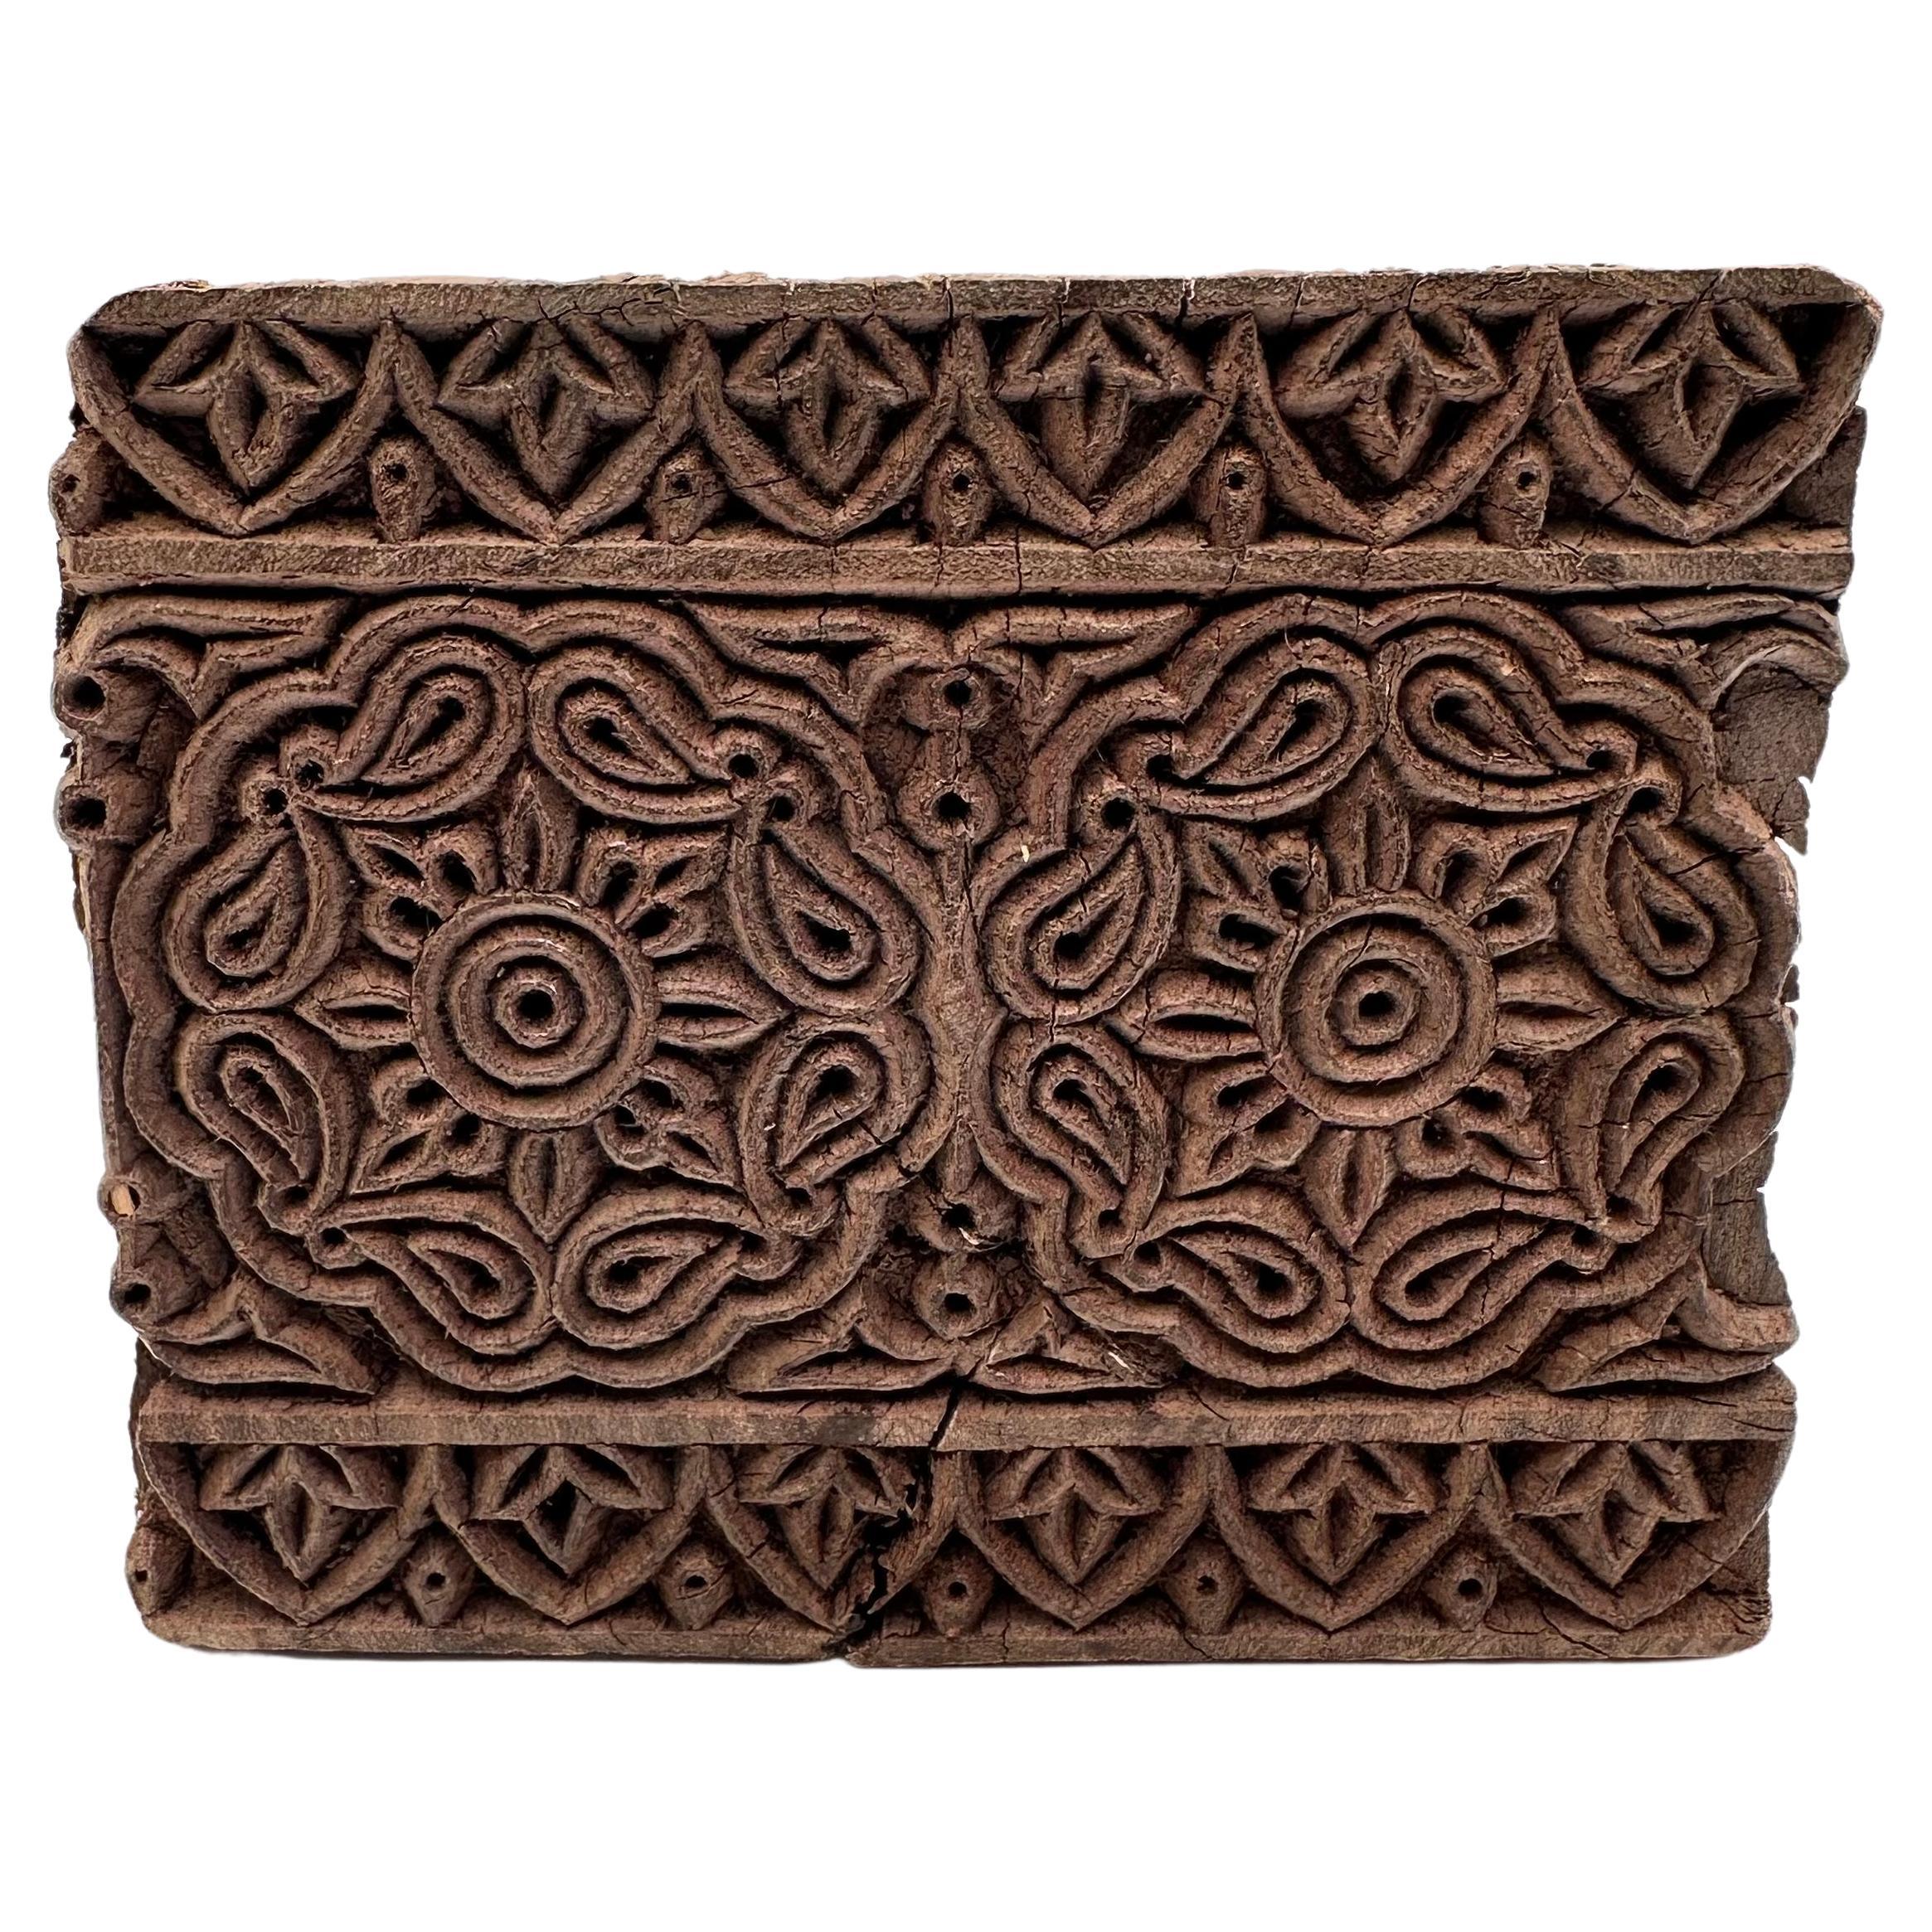 Antique Hand Carved Wood Printing Block with Large Rosettes